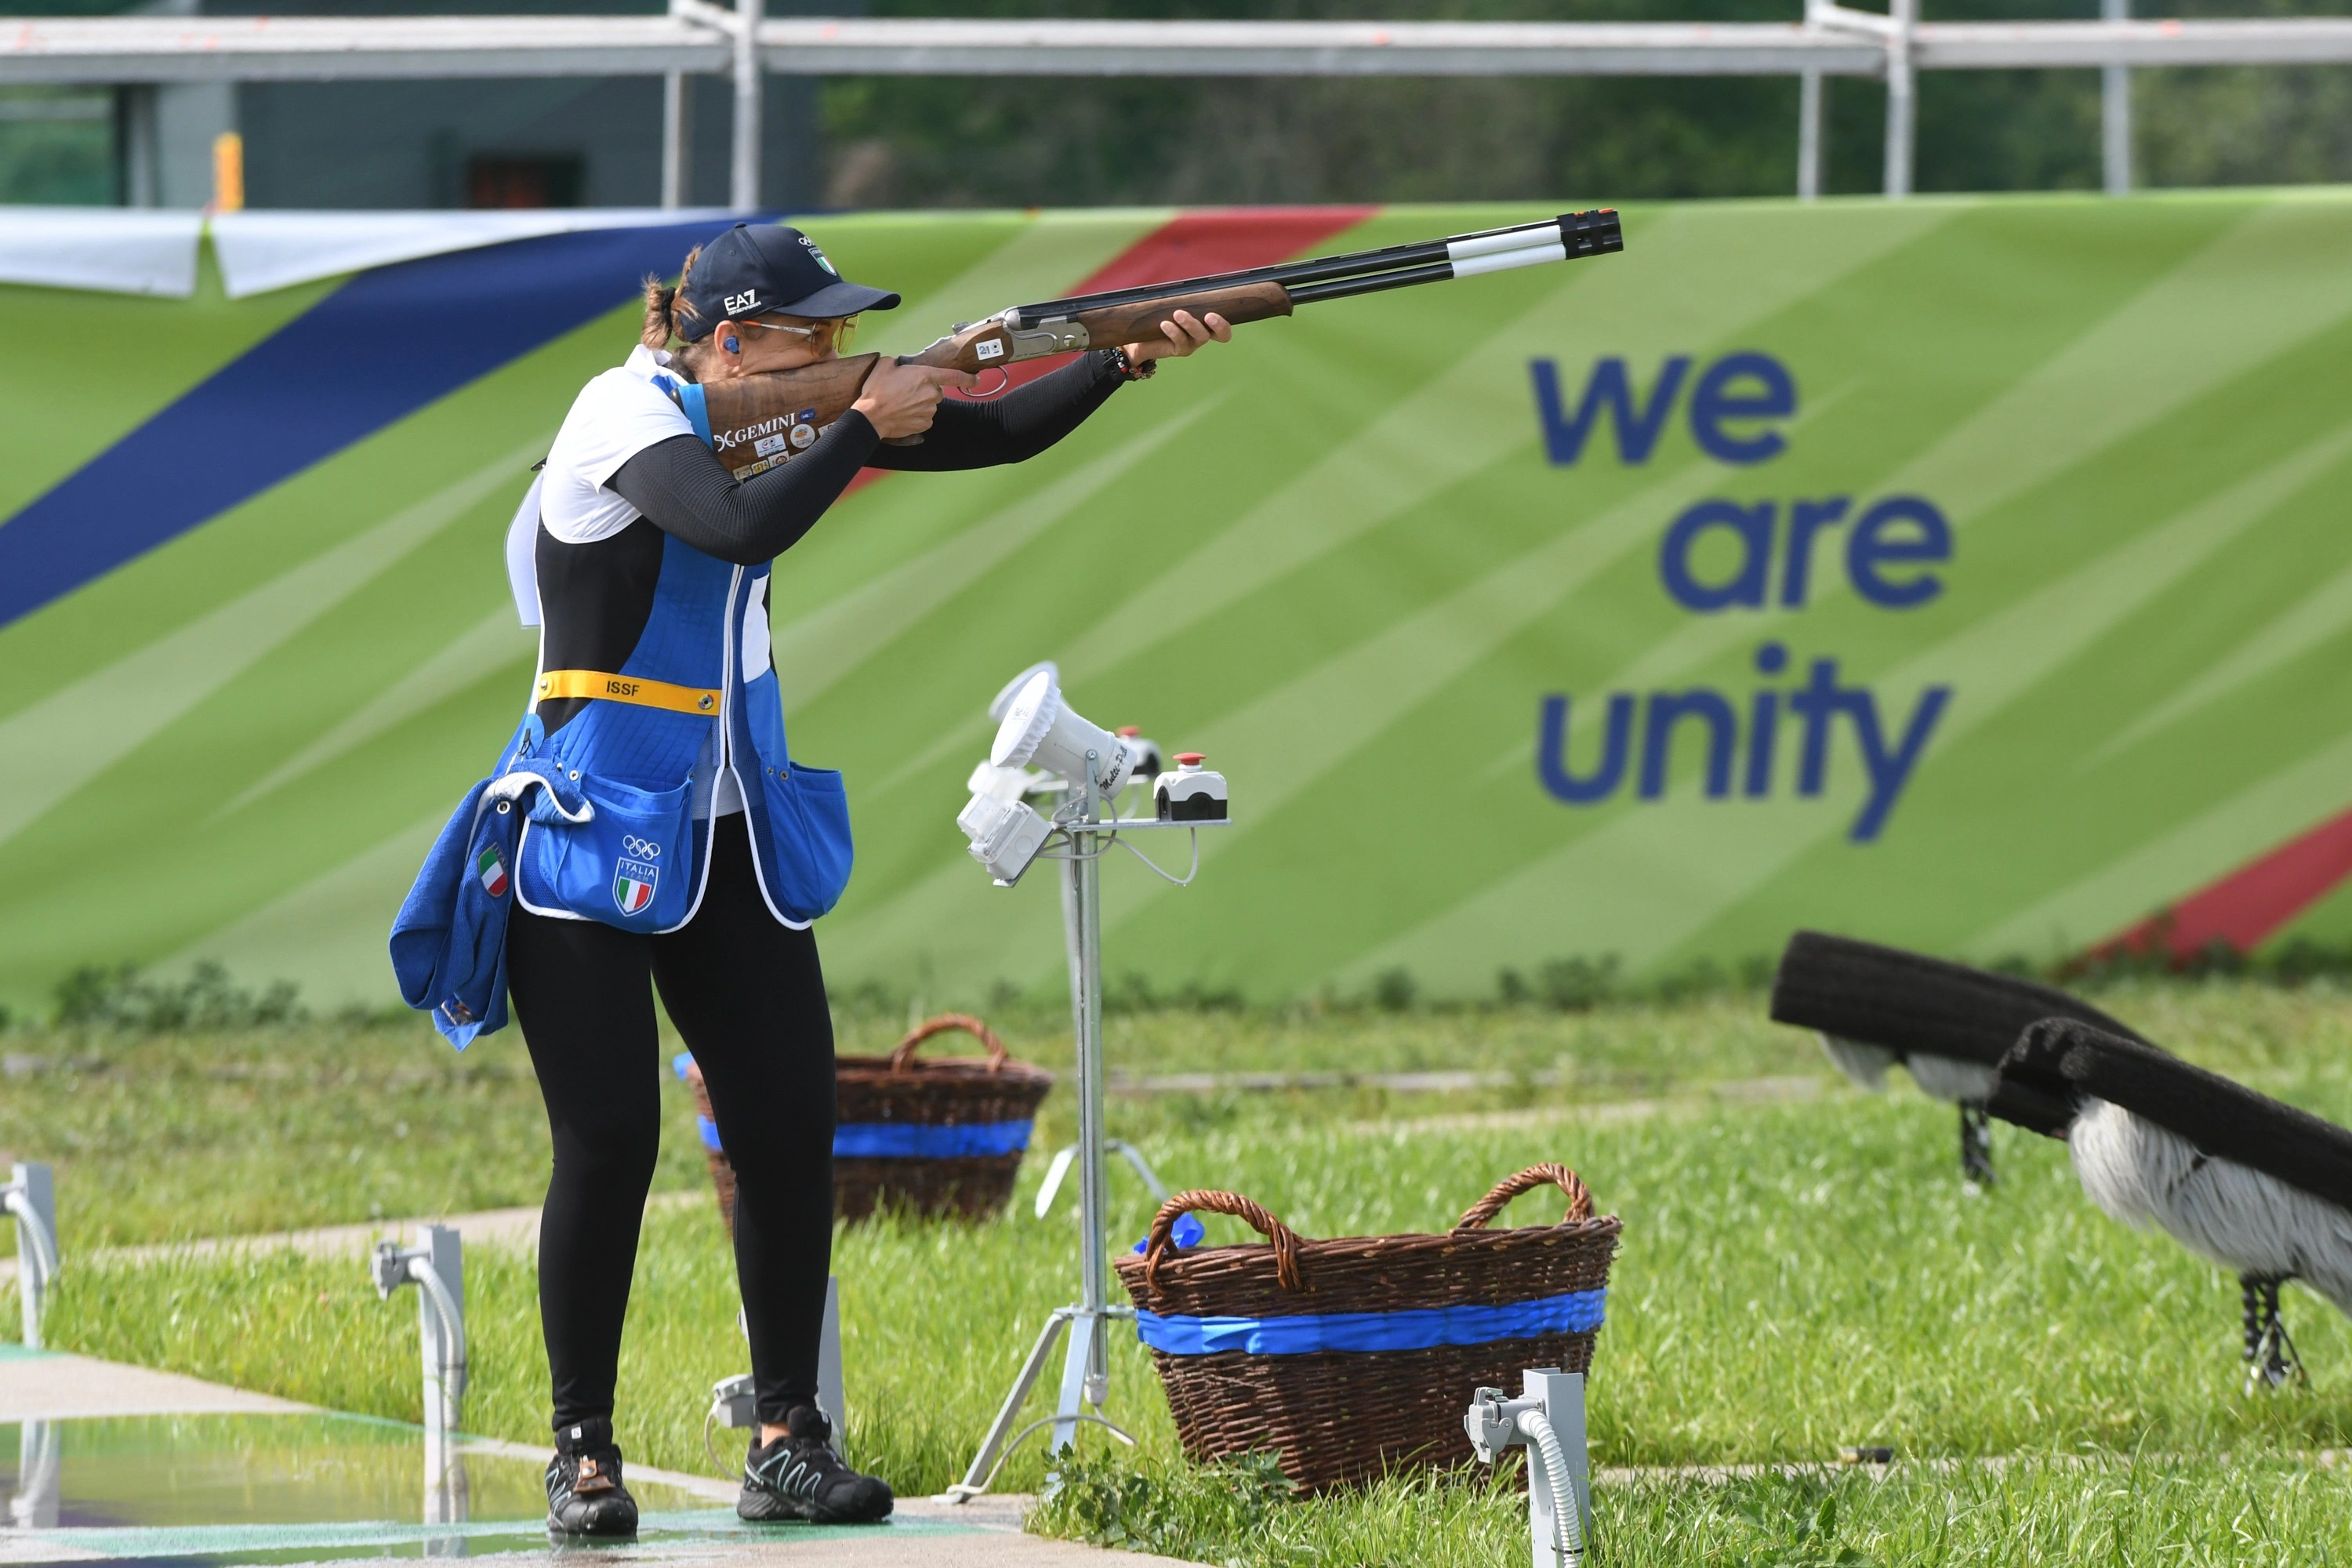 Skeet for Italians and Finns. Ukraine won in the Rapid Fire Pistol competition